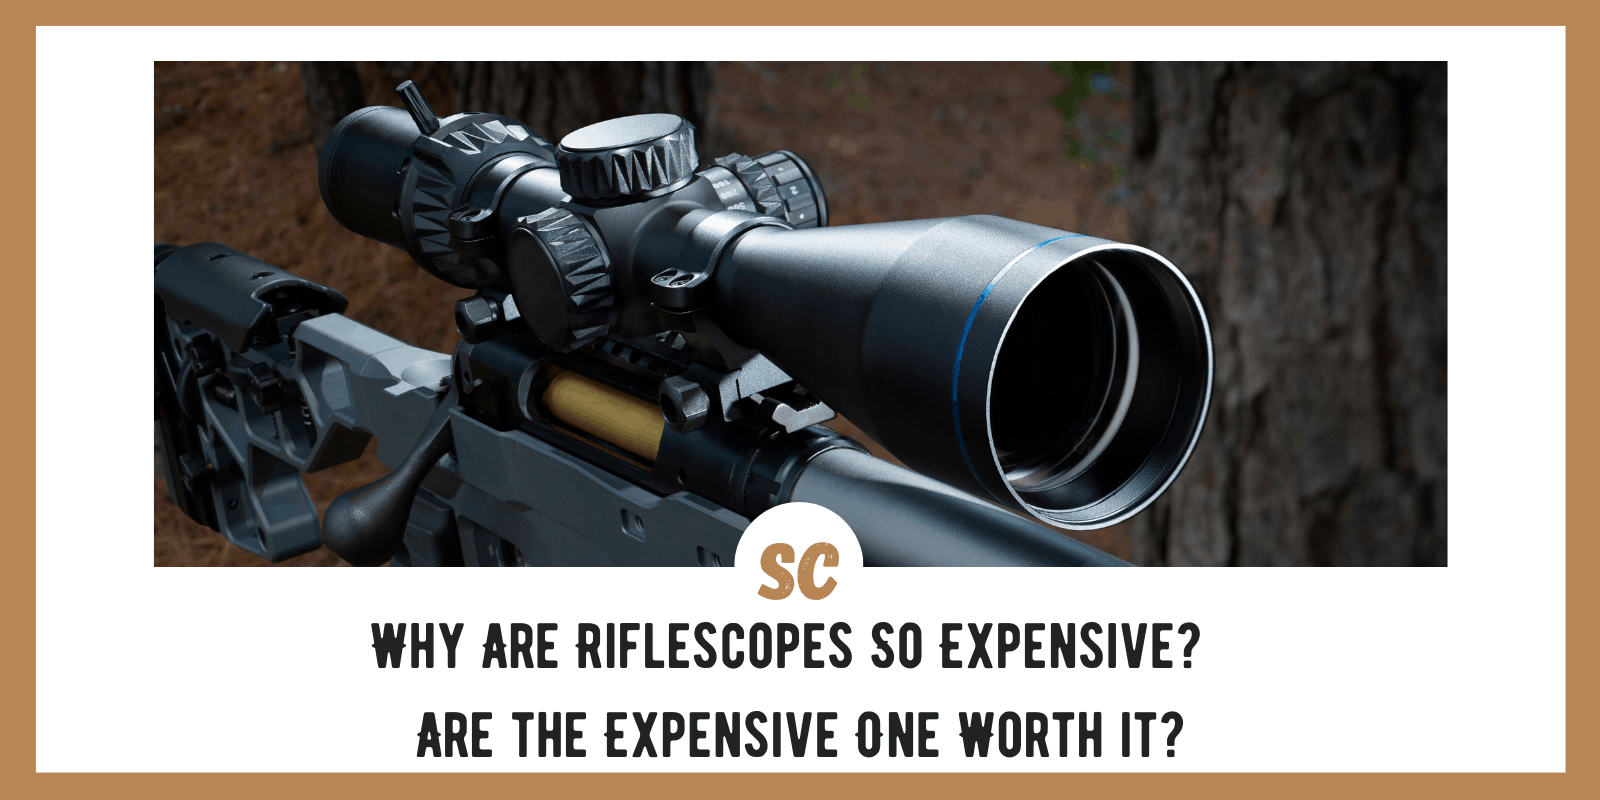 Why Are Riflescopes So Expensive? Are They Worth it?